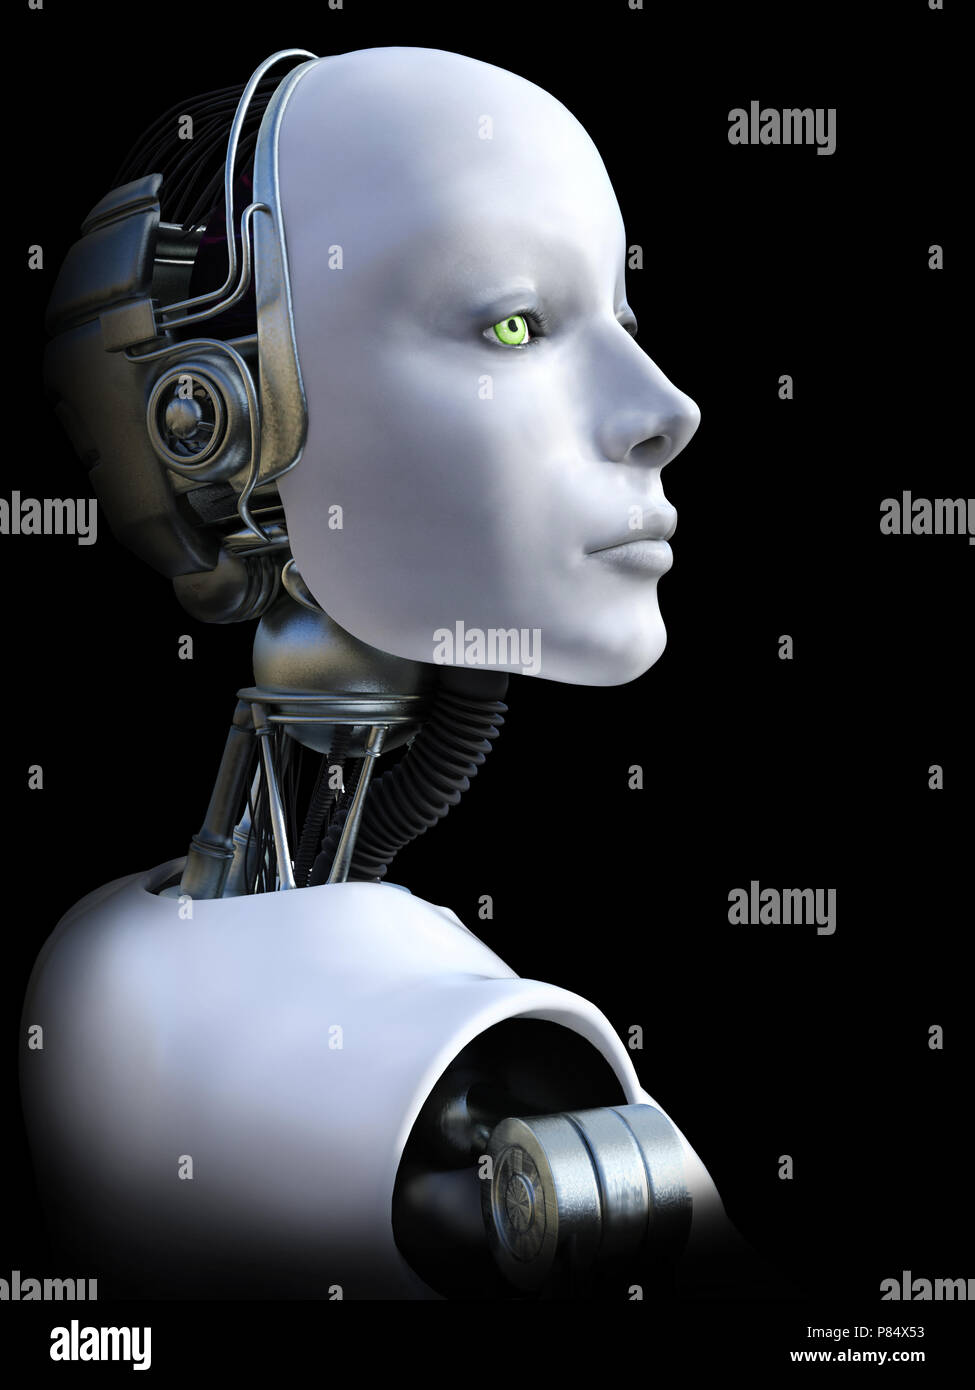 Face portrait of a female robot, 3D rendering. Black background. Stock Photo